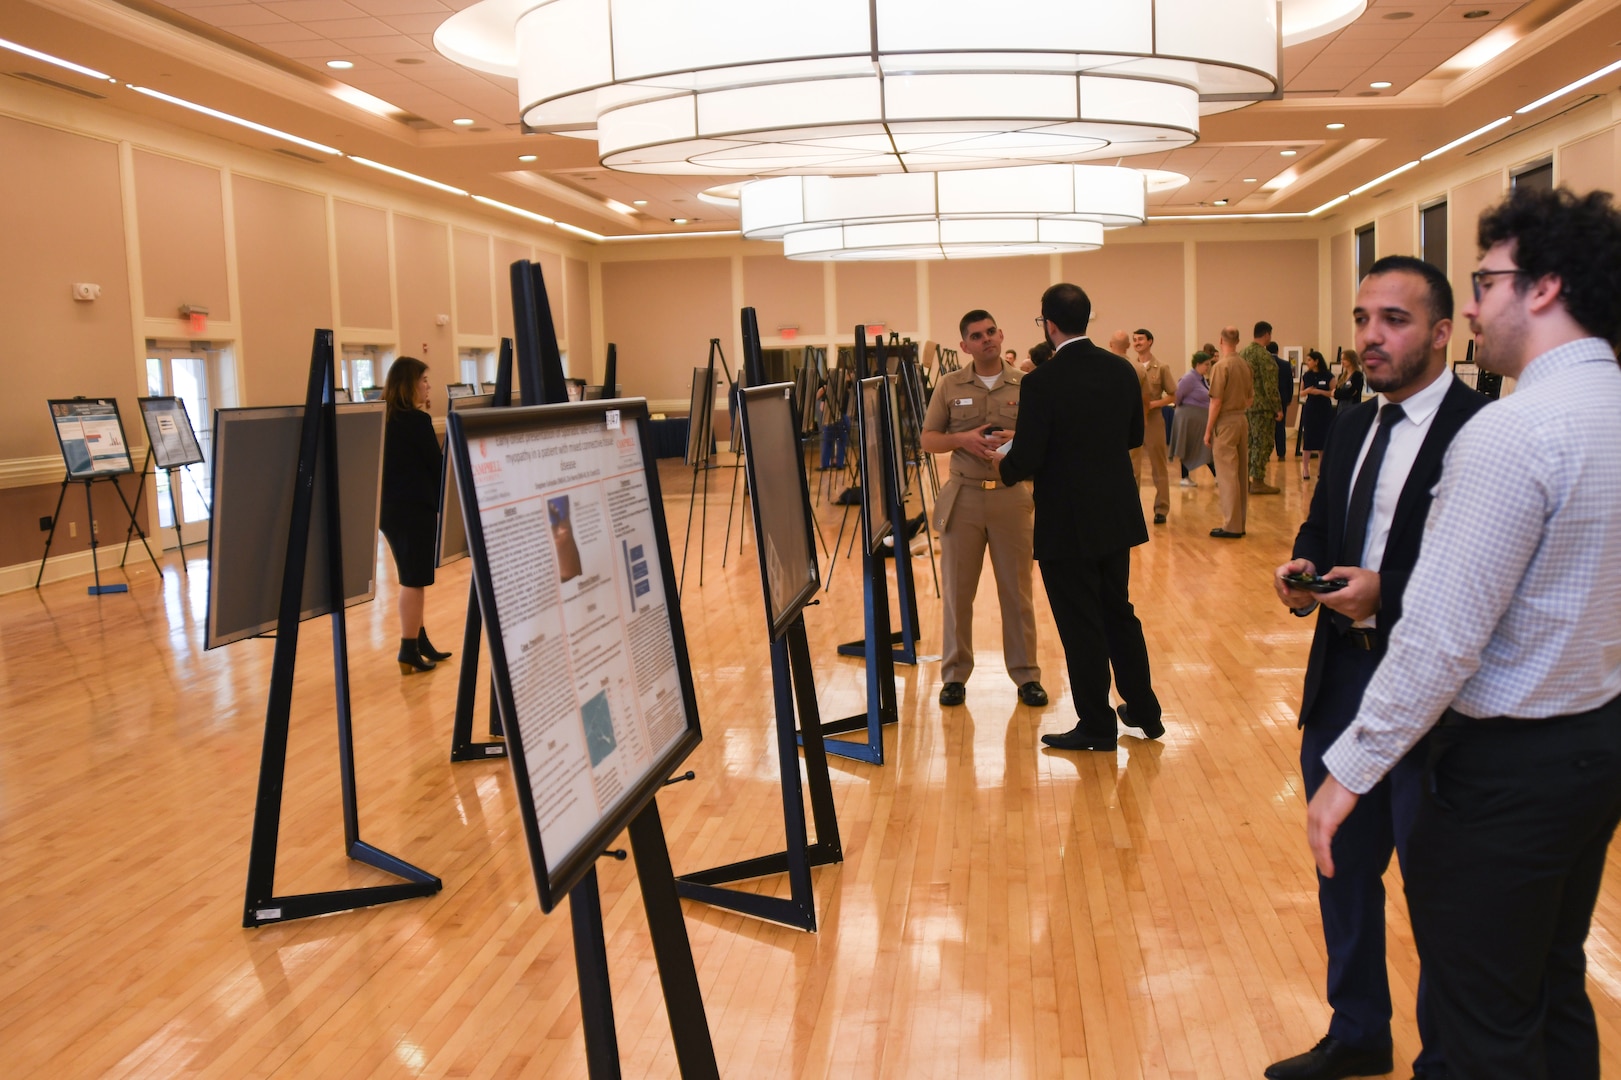 A participant in Naval Medical Center Camp Lejeune's 13th Annual Research Symposium meets with judges to discuss the research behind the poster presentation for their research. This year's symposium featured 73 submissions from NMCCL, 2nd Medical Battalion, 2nd Dental Battalion, Marine Raider Battalion, Campbell University, Duke University and Cape Fear Valley Health. Research submissions included poster and podium presentations with awards presented in various categories.